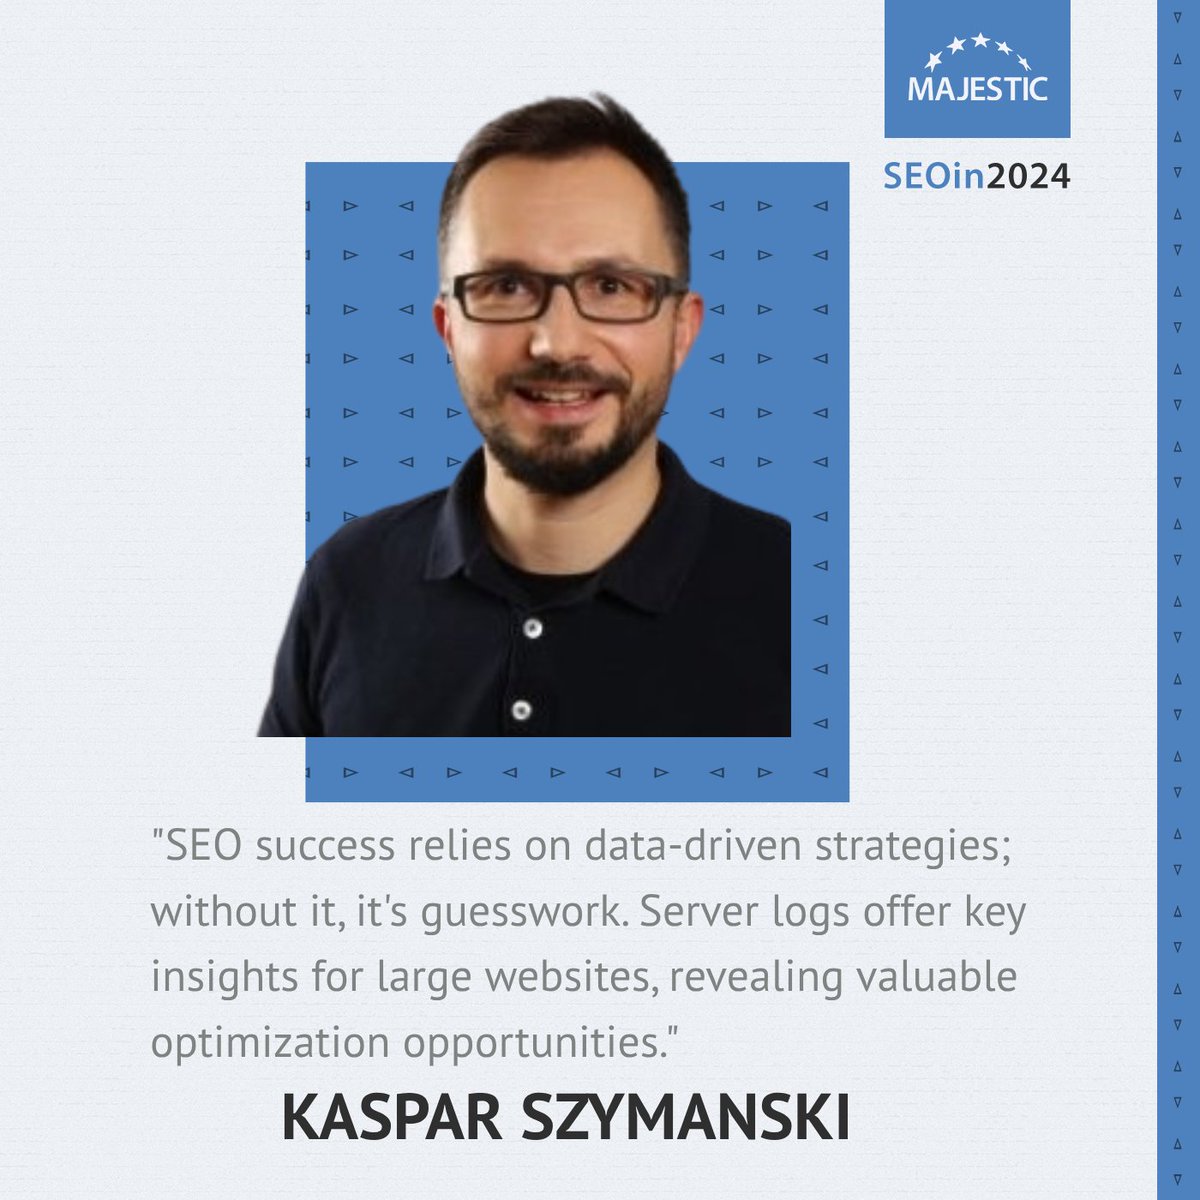 SEO success lies on data-driven strategies; without it, it's guesswork. Kaspar Szymanski (@kas_tweets) believes server logs offer key insights for large websites and reveal valuable optimization opportunities. maj.to/3P4F2zl